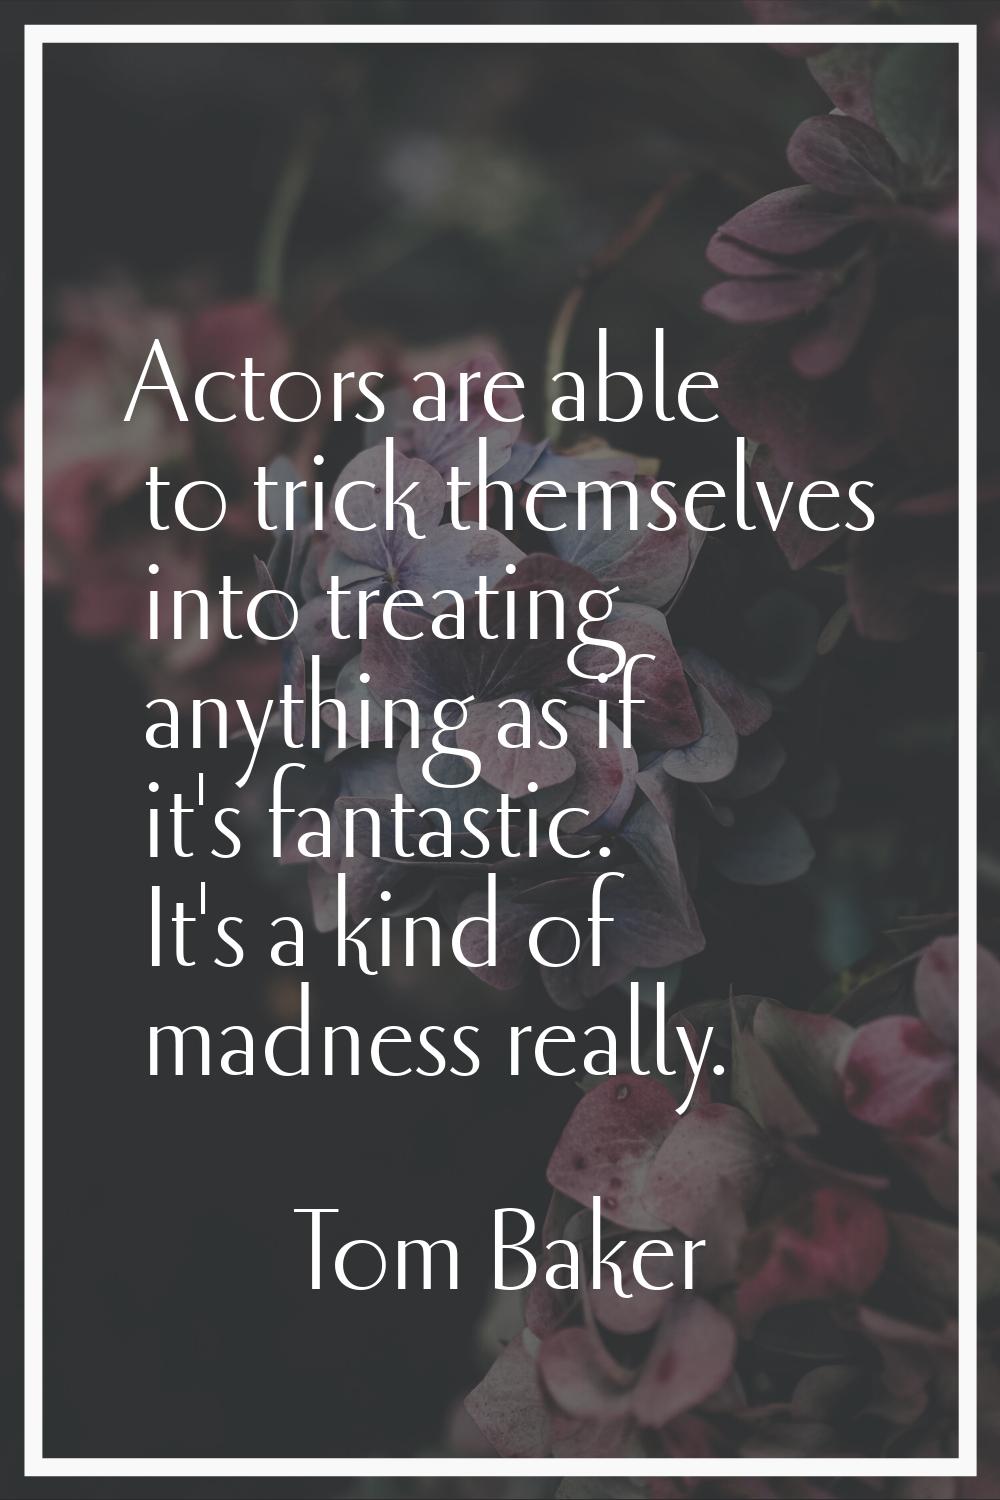 Actors are able to trick themselves into treating anything as if it's fantastic. It's a kind of mad